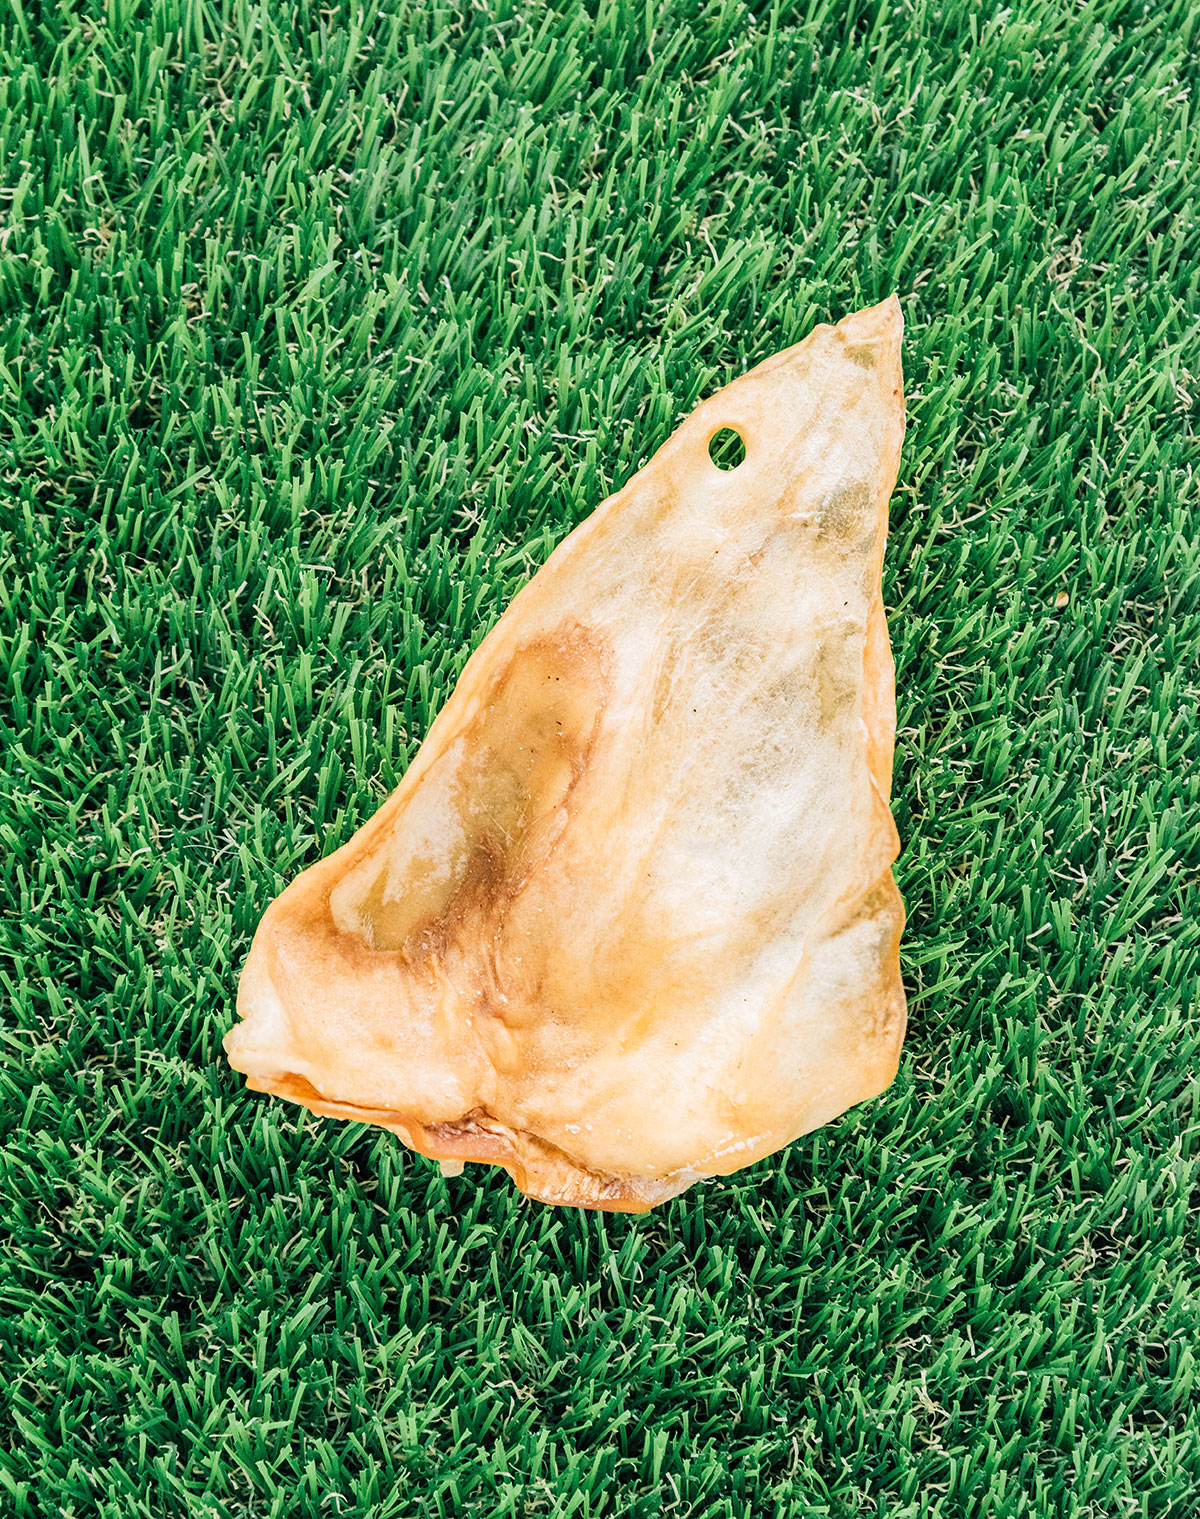 golden brown cow ear laying on grass.